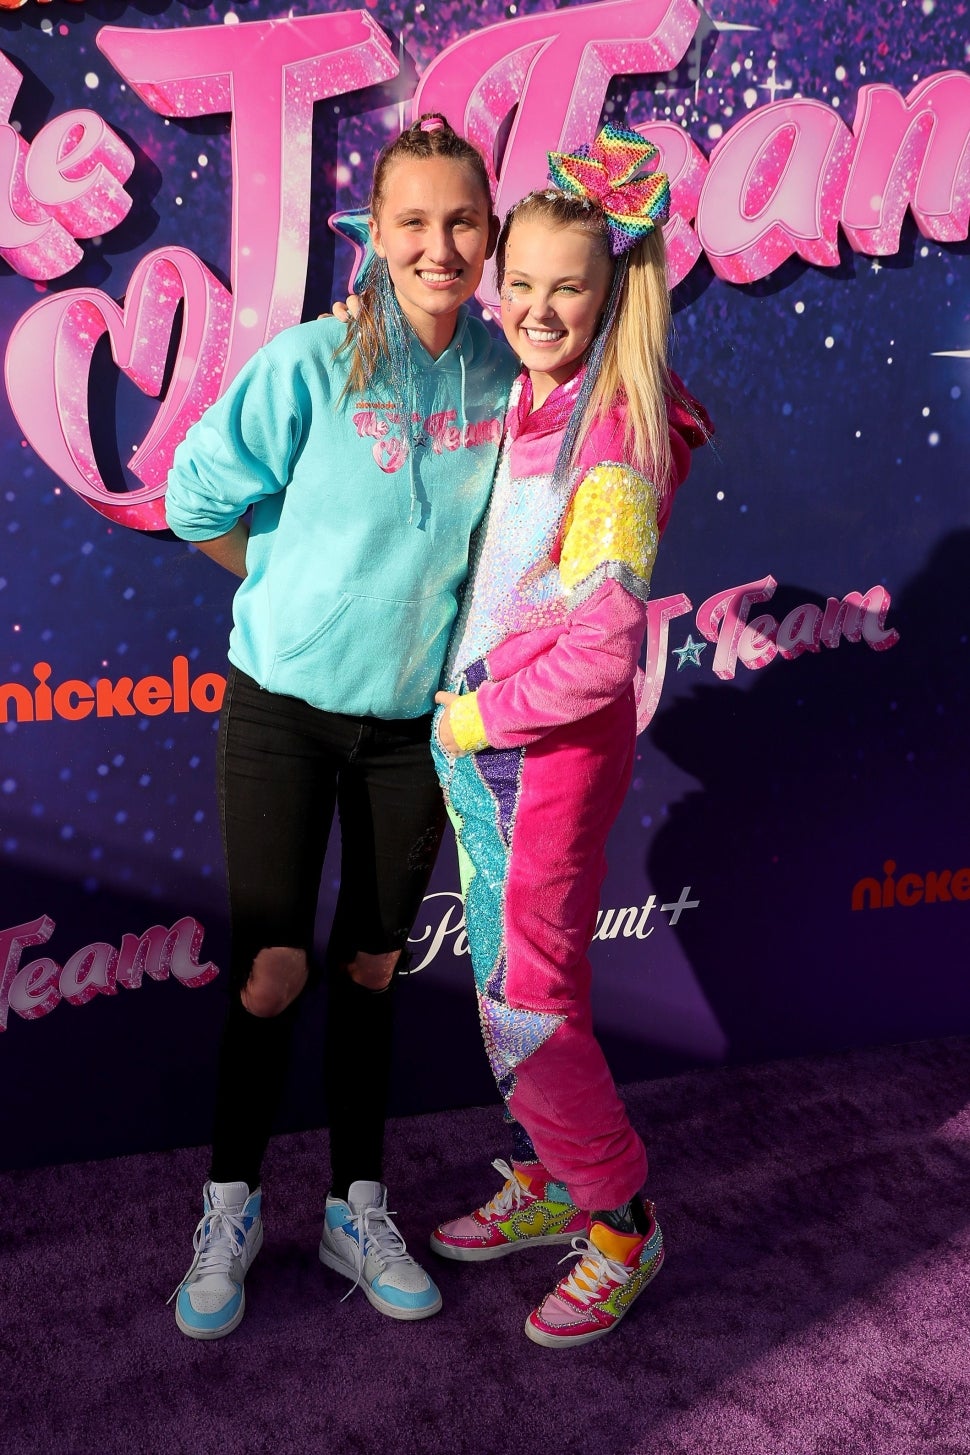 Kylie Prew and JoJo Siwa attend a drive-in screening and performance for the Paramount+ original movie "The J Team" at the Rose Bowl on September 03, 2021 in Pasadena, California.